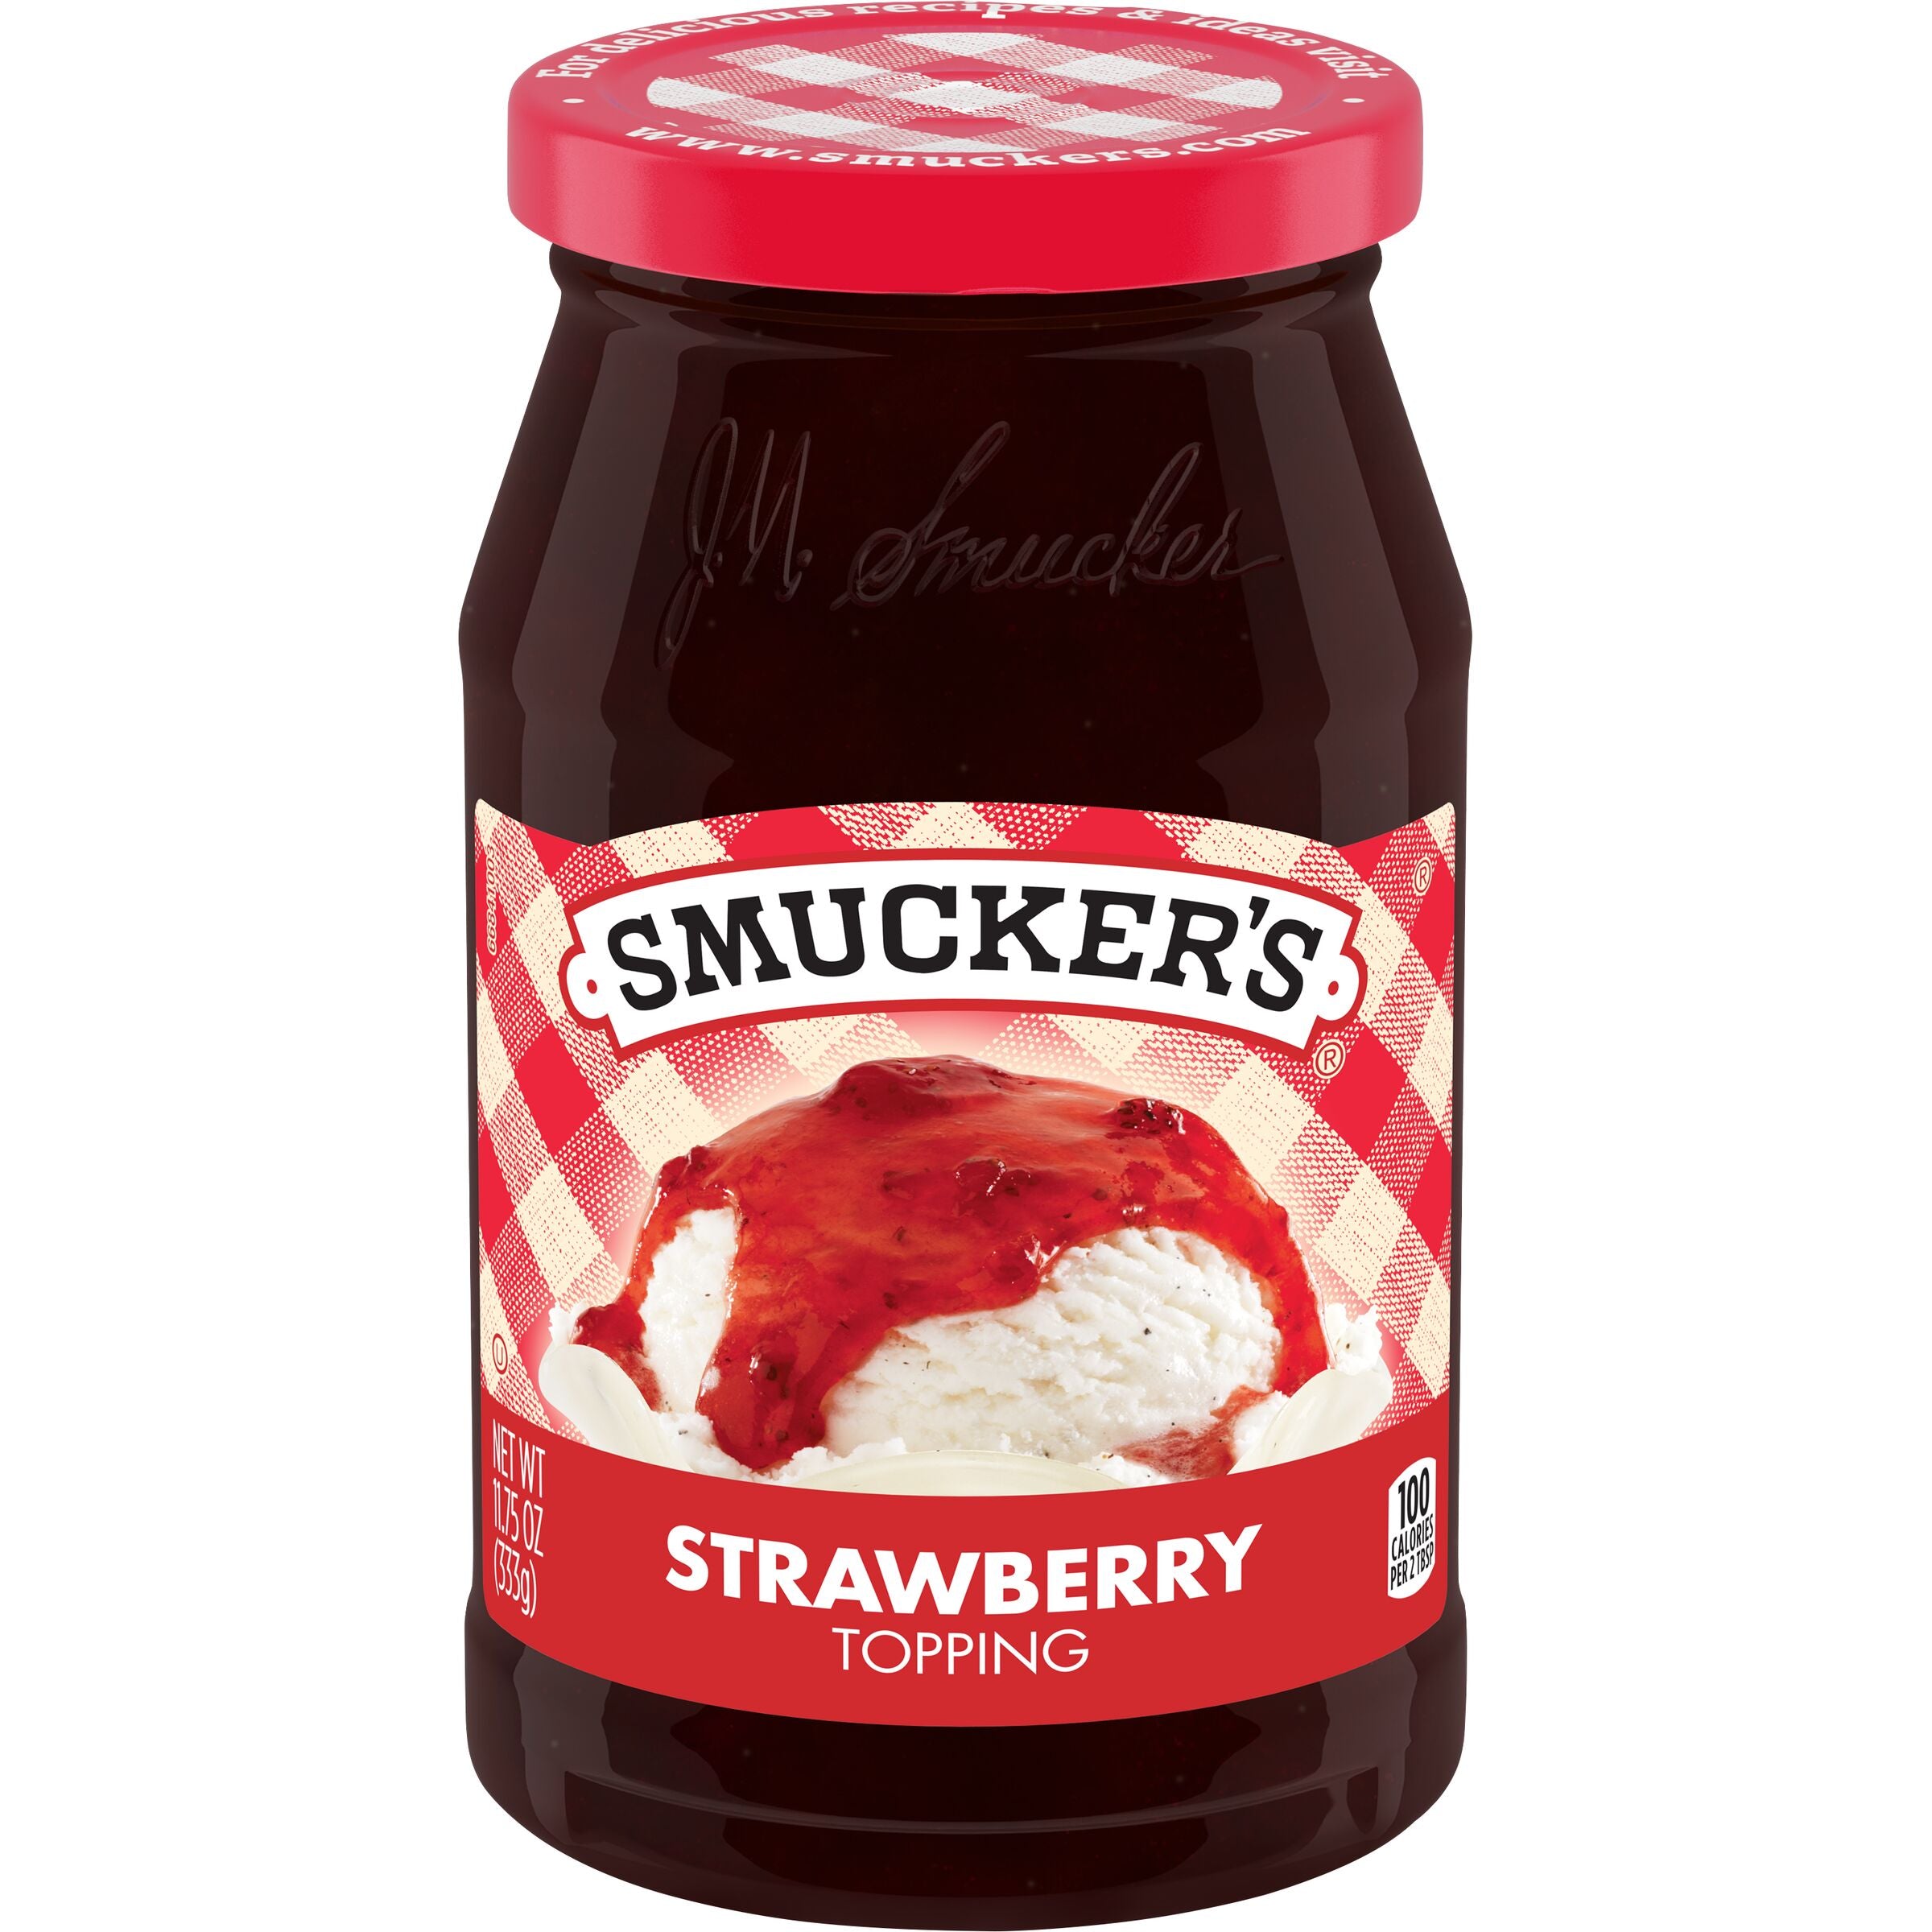 Smucker's Strawberry Topping, 11.75 oz